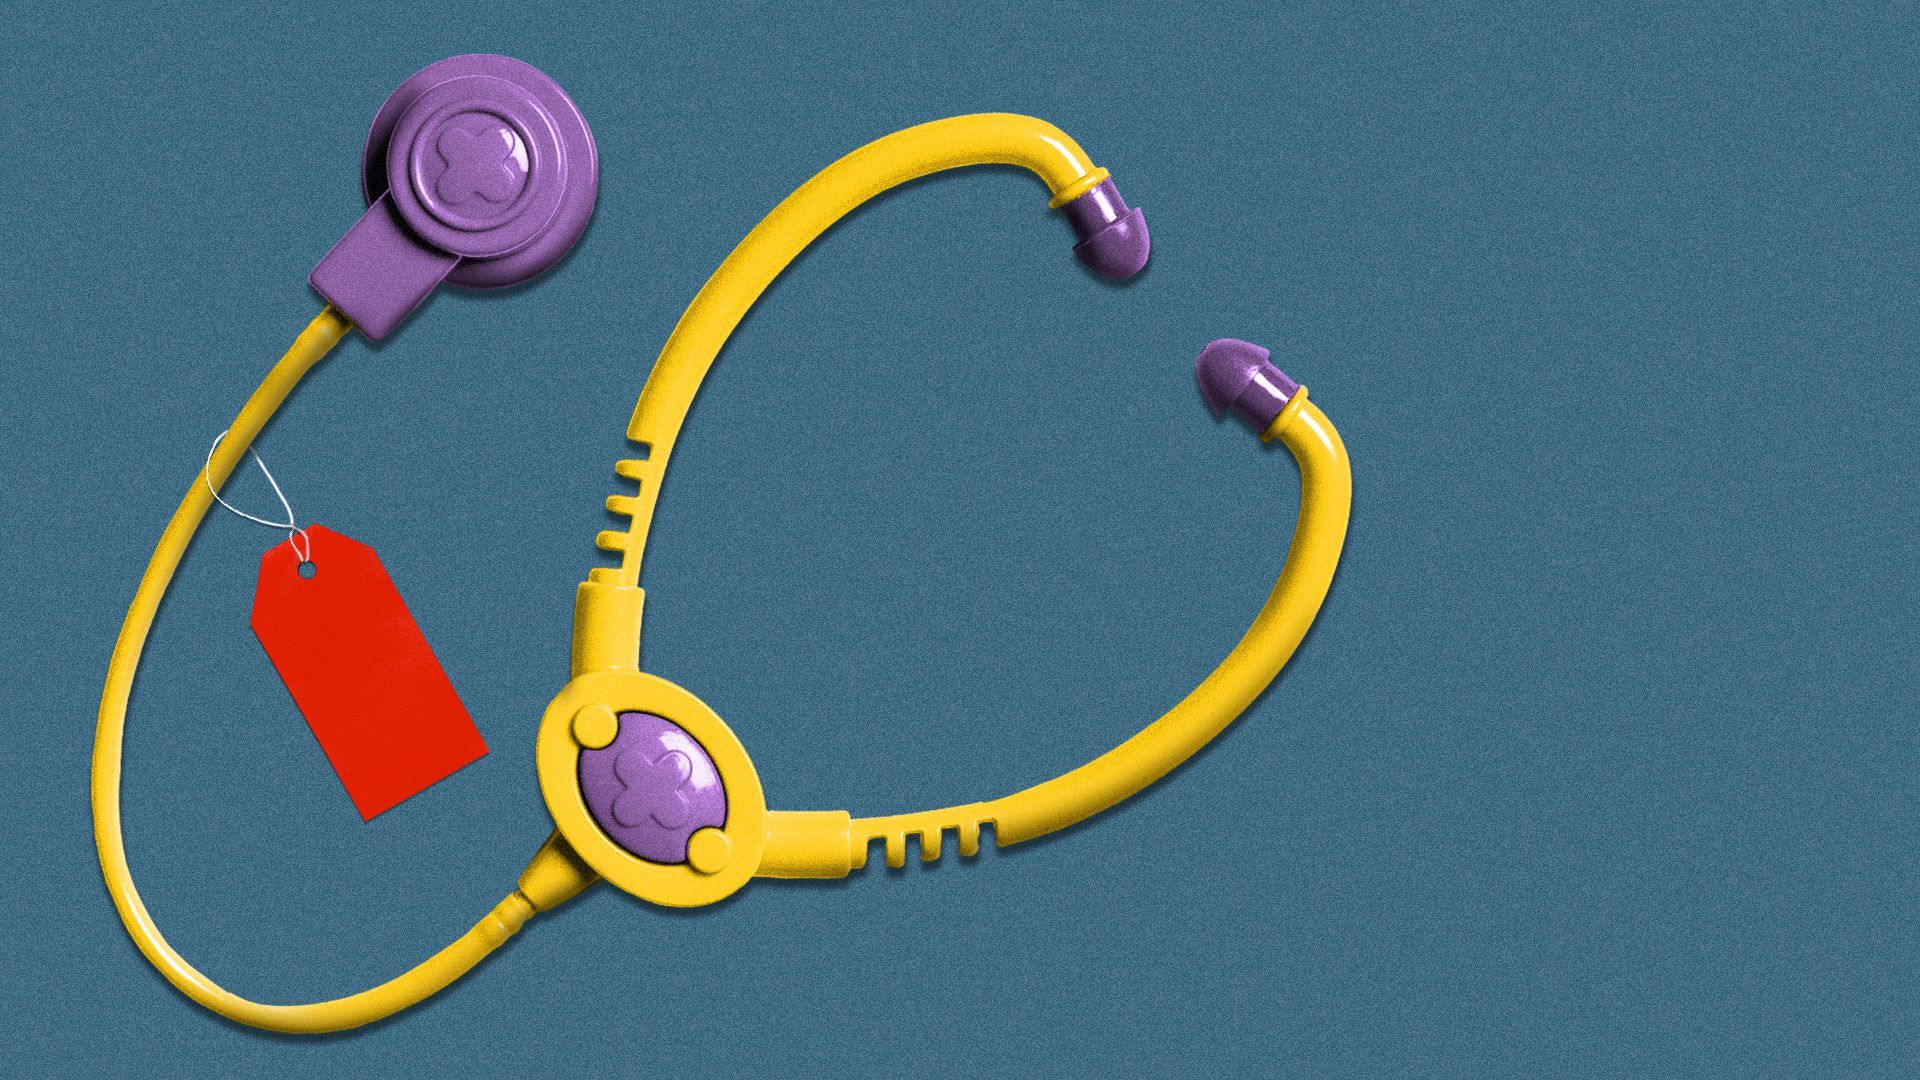 Illustration of a price tag on a toy stethoscope.